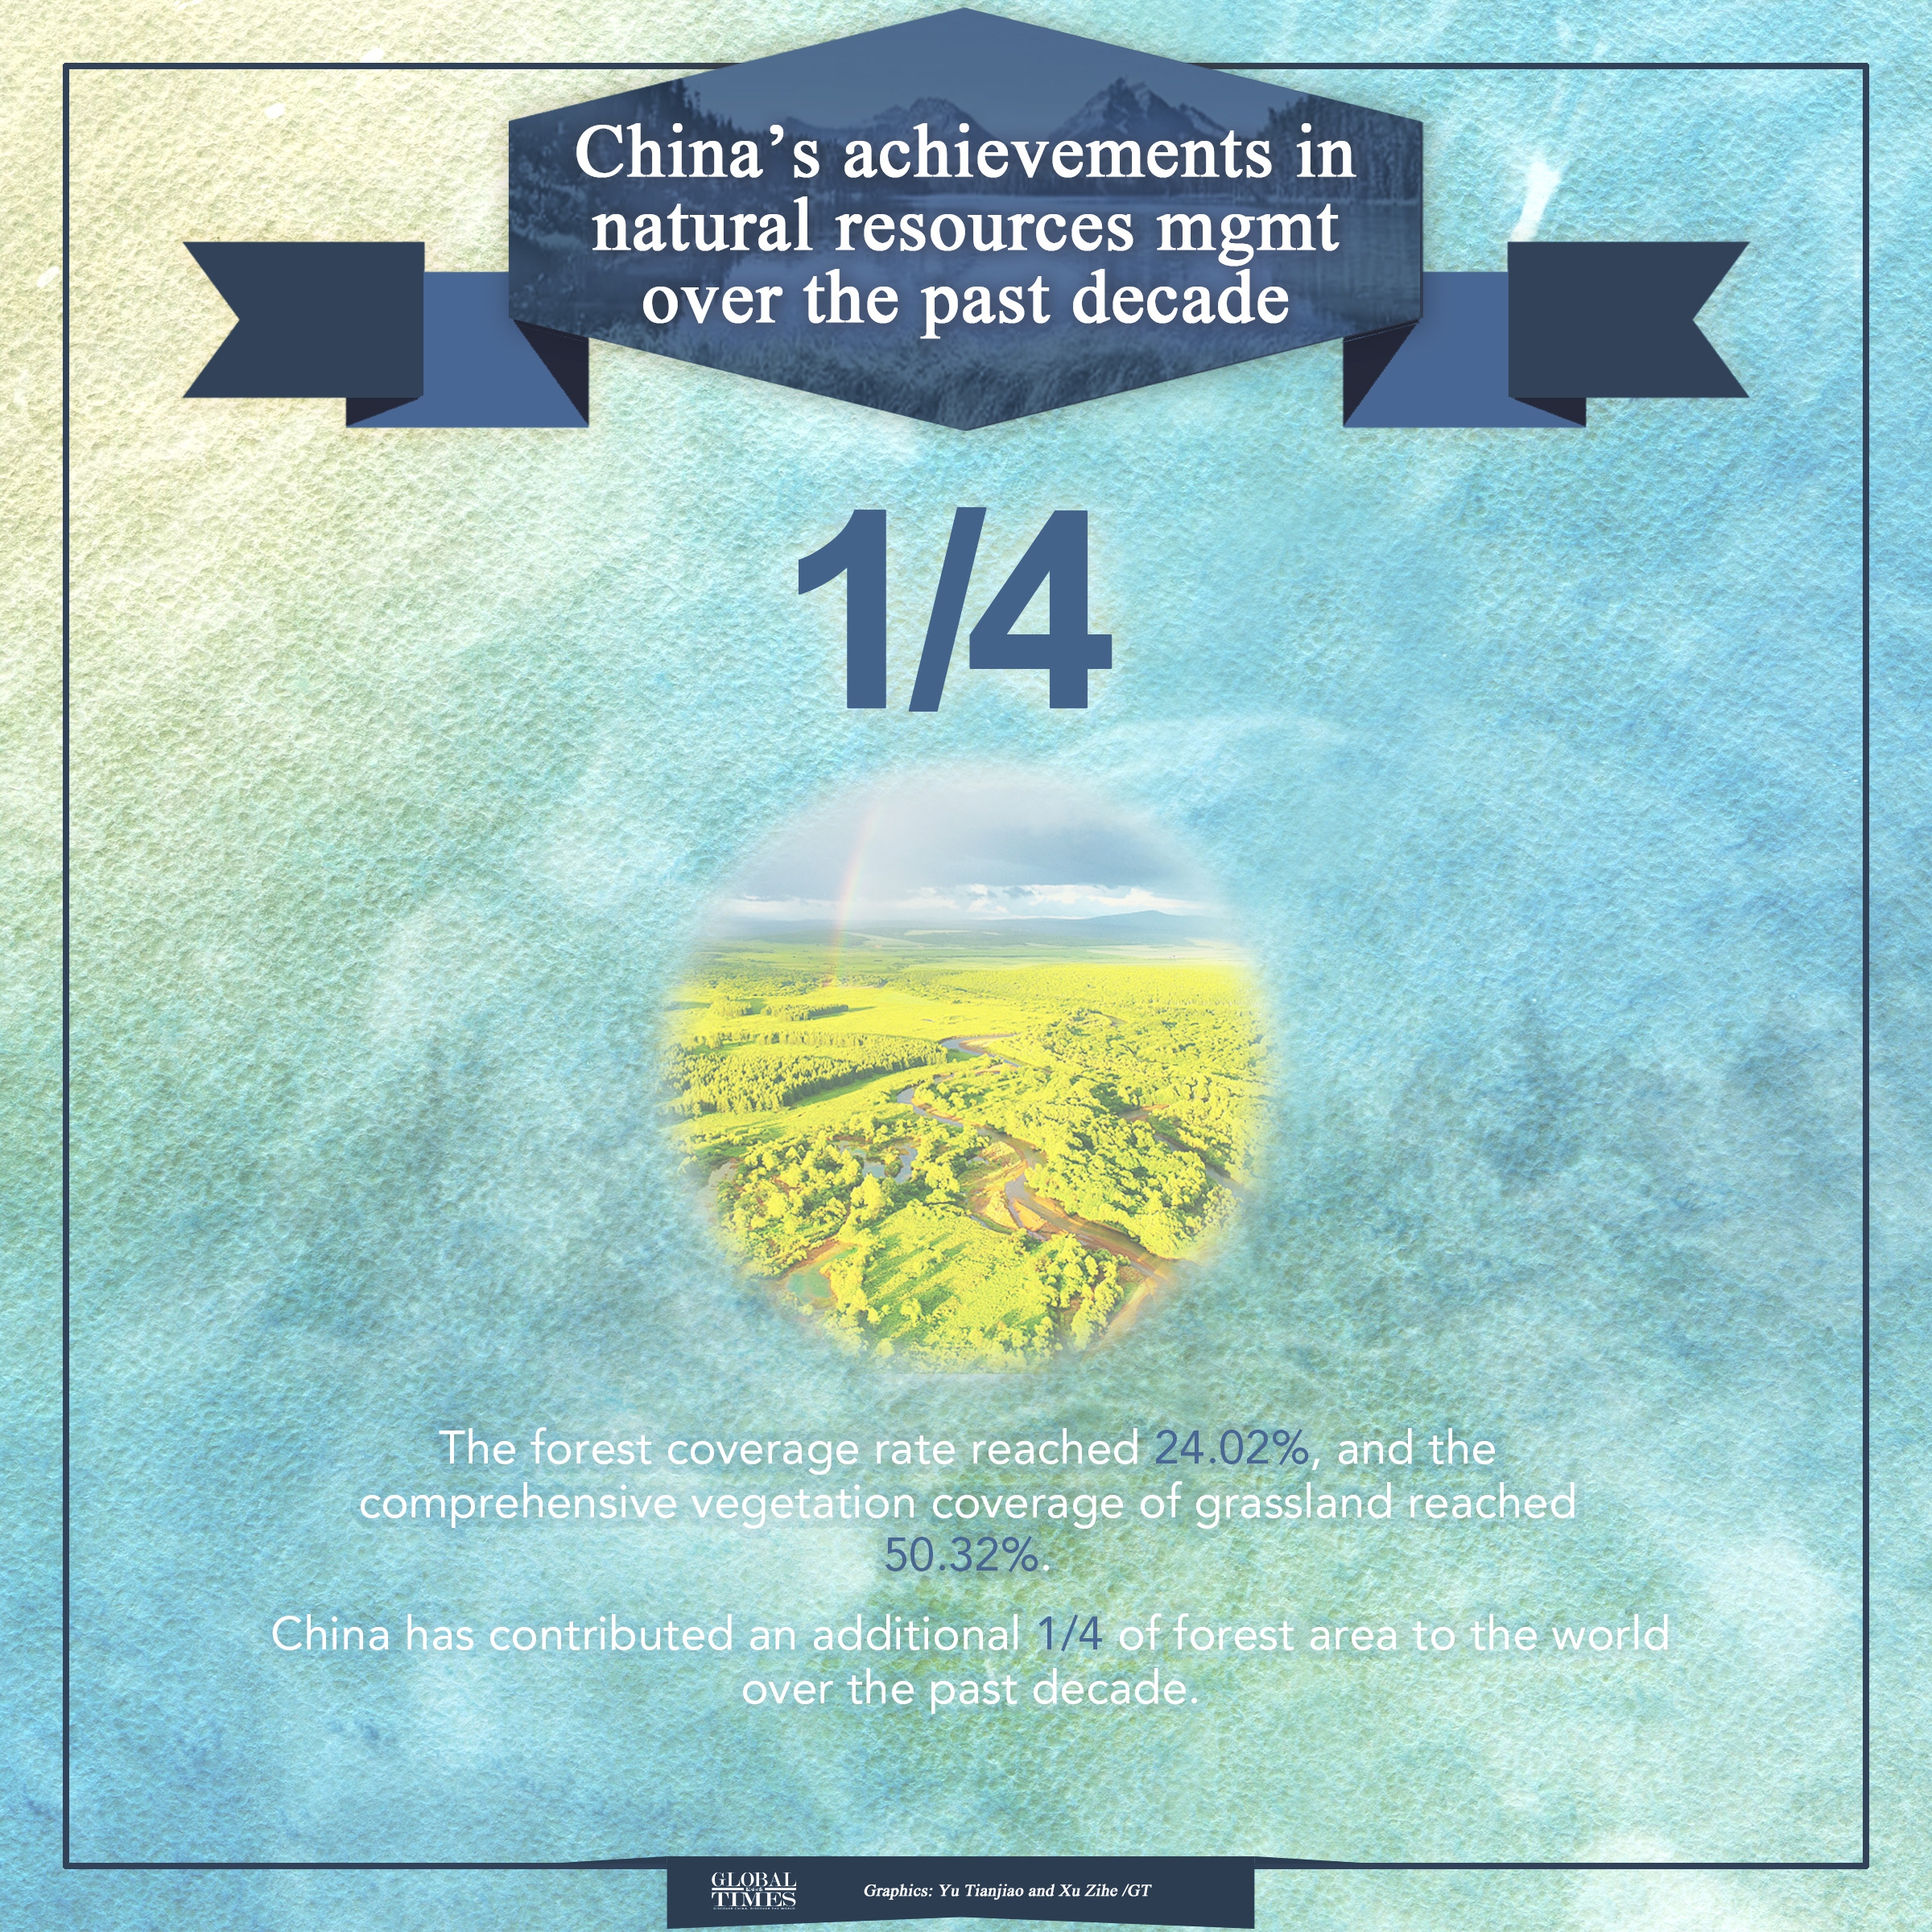 China’s achievements in natural resources management over the past decade